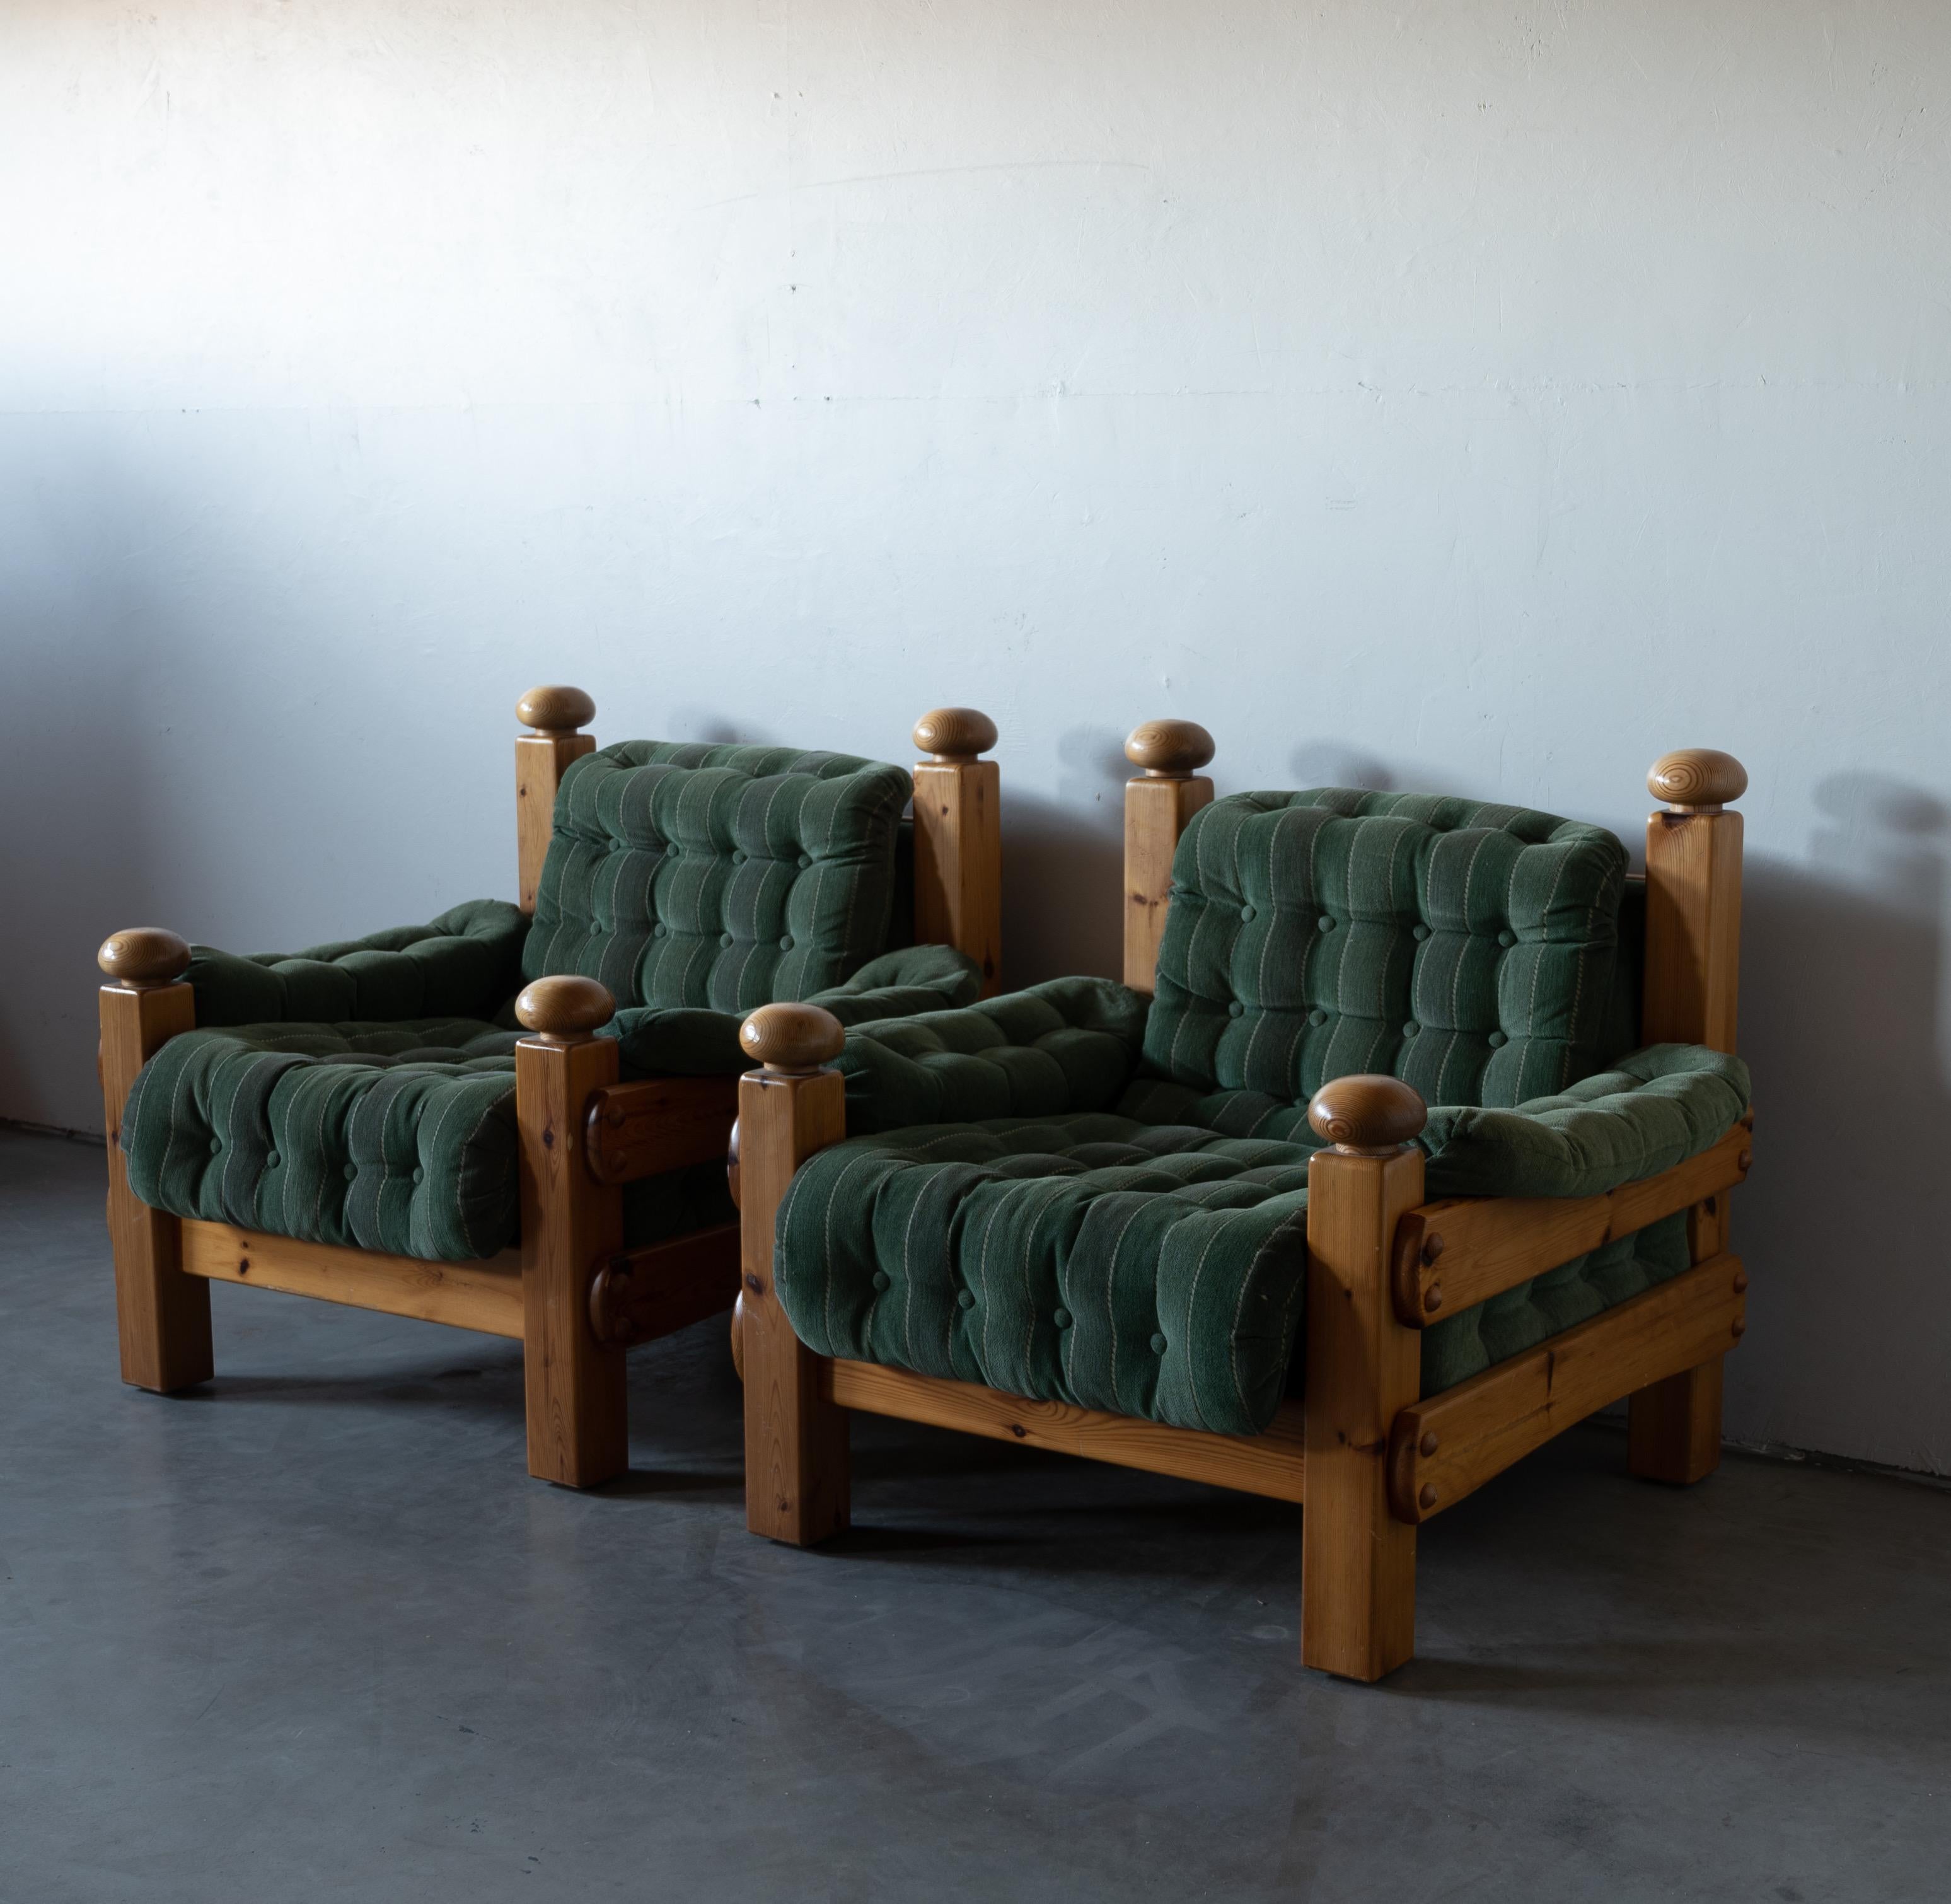 Swedish Designer, Lounge Chairs, Solid Pine, Green Fabric, Sweden, 1970s For Sale 2